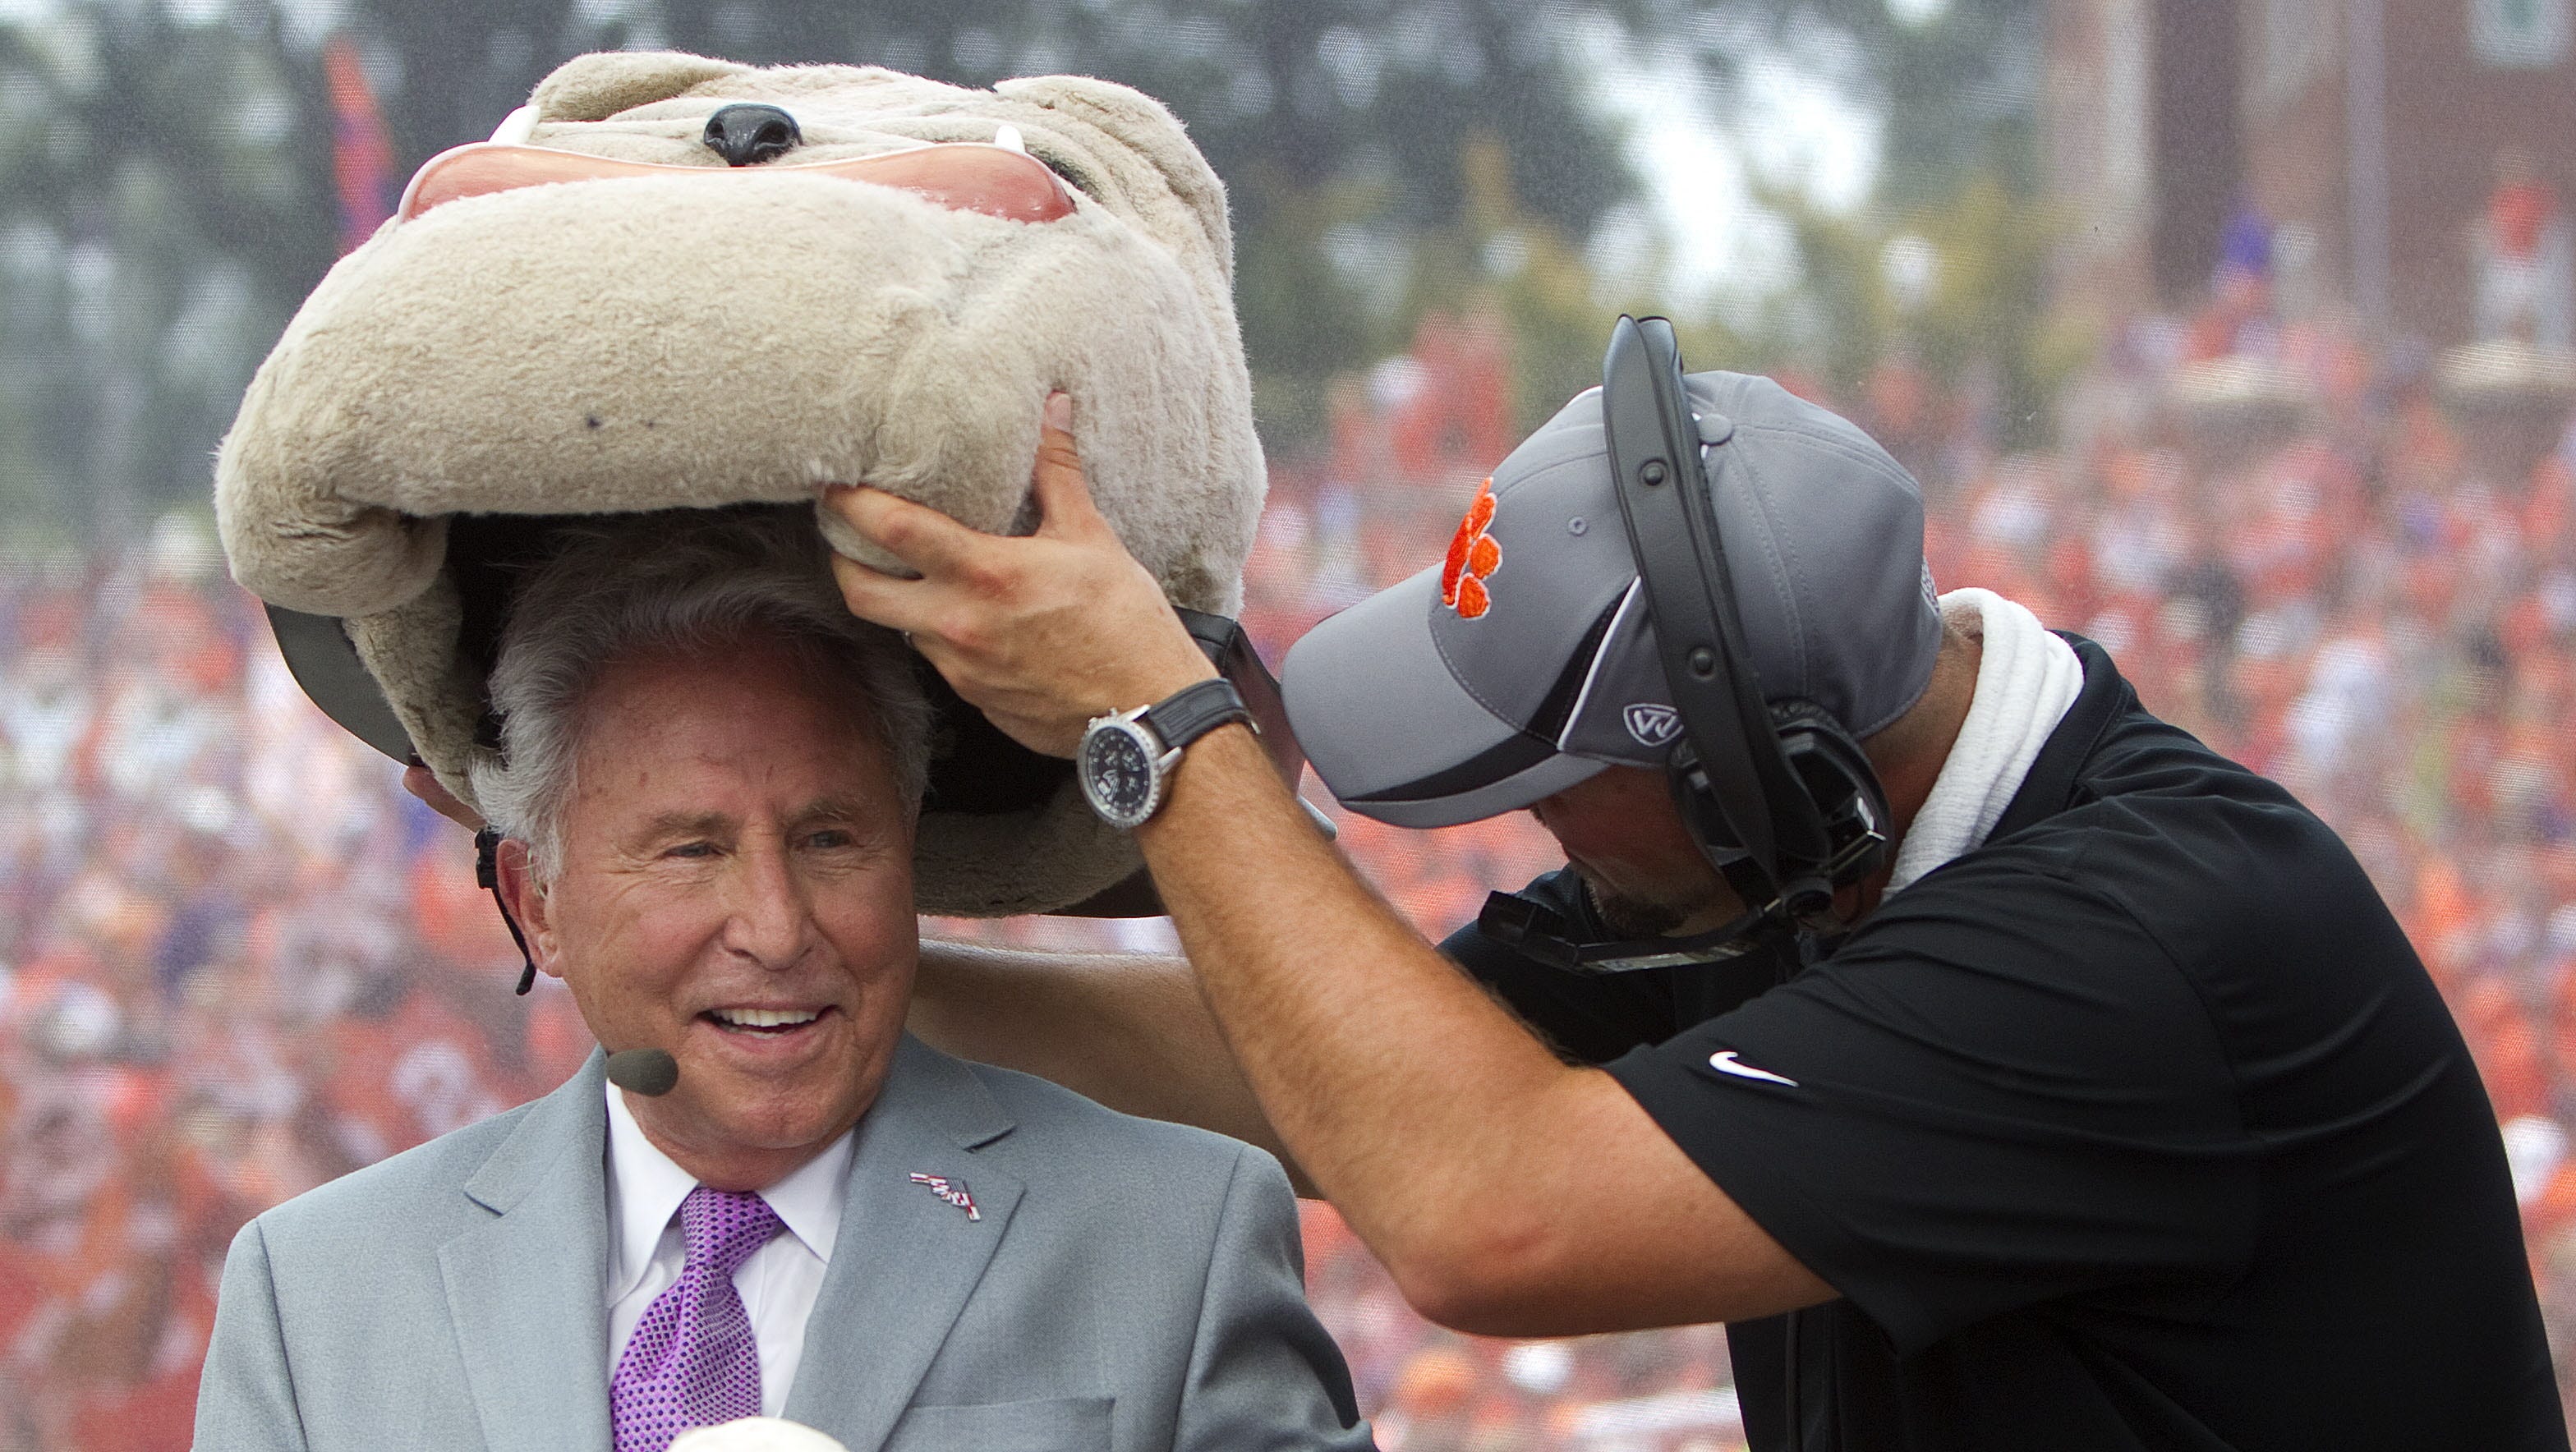 Lee Corso returns to ESPN 'College GameDay' set after COVID-19 hiatus